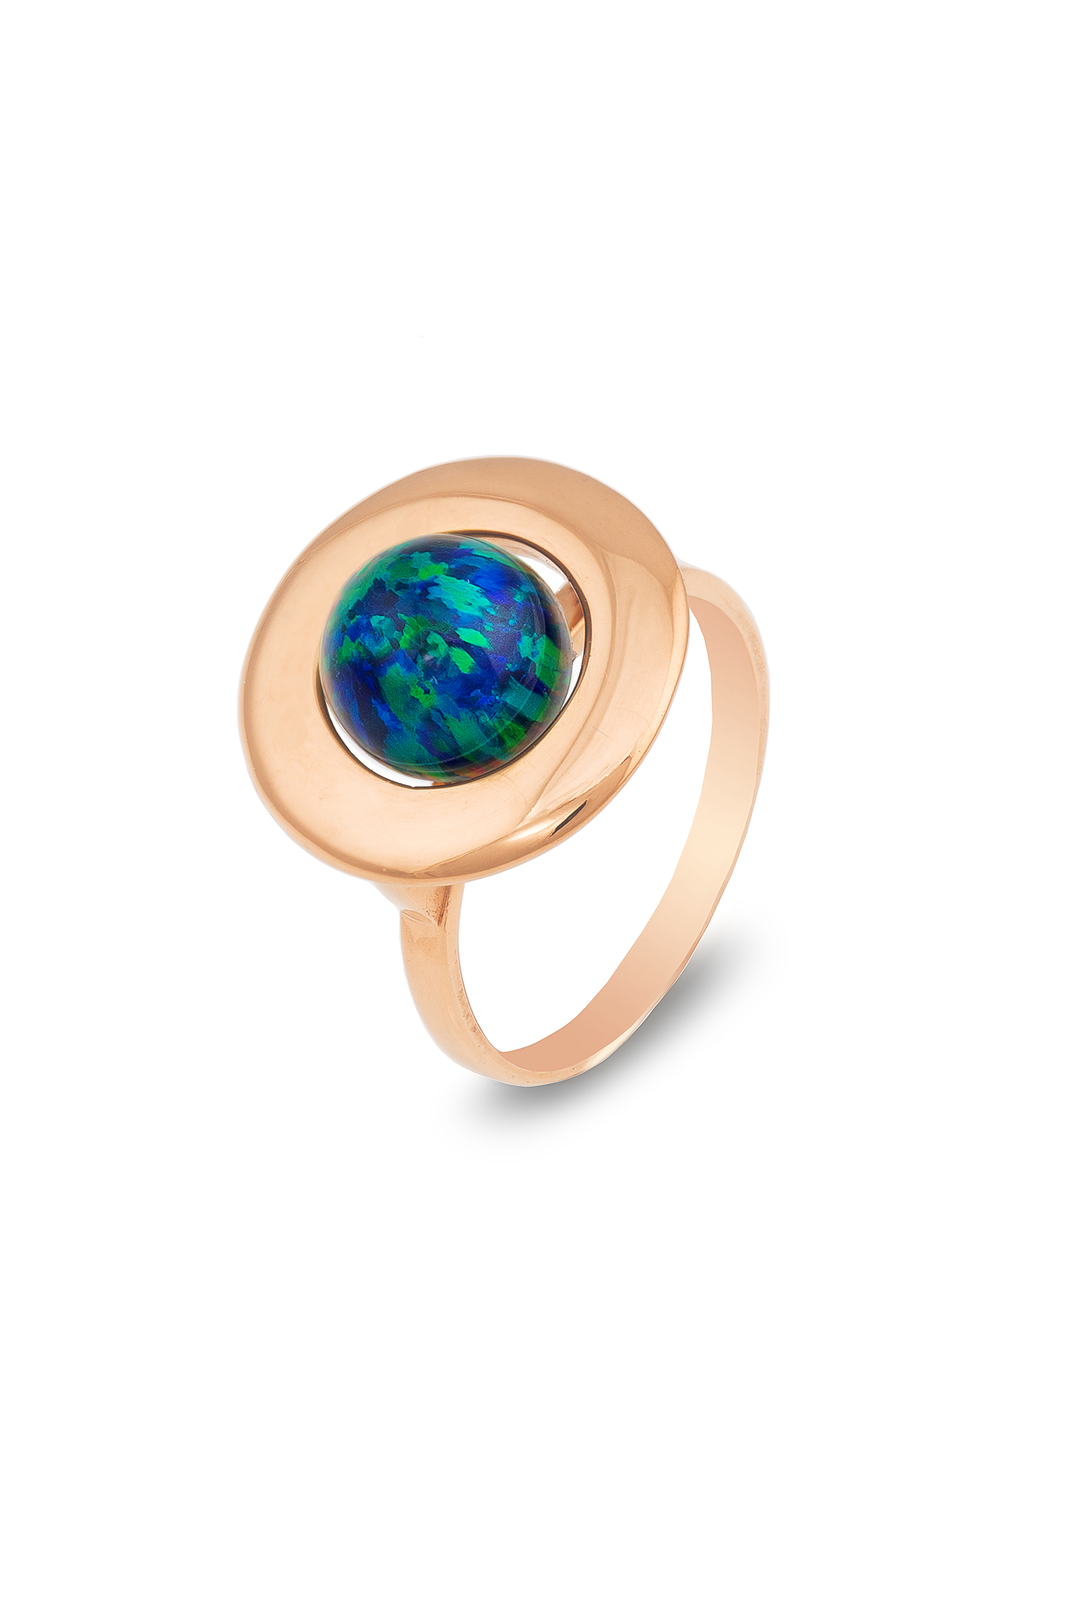 Home Planet Night Sky Opal 9ct Gold